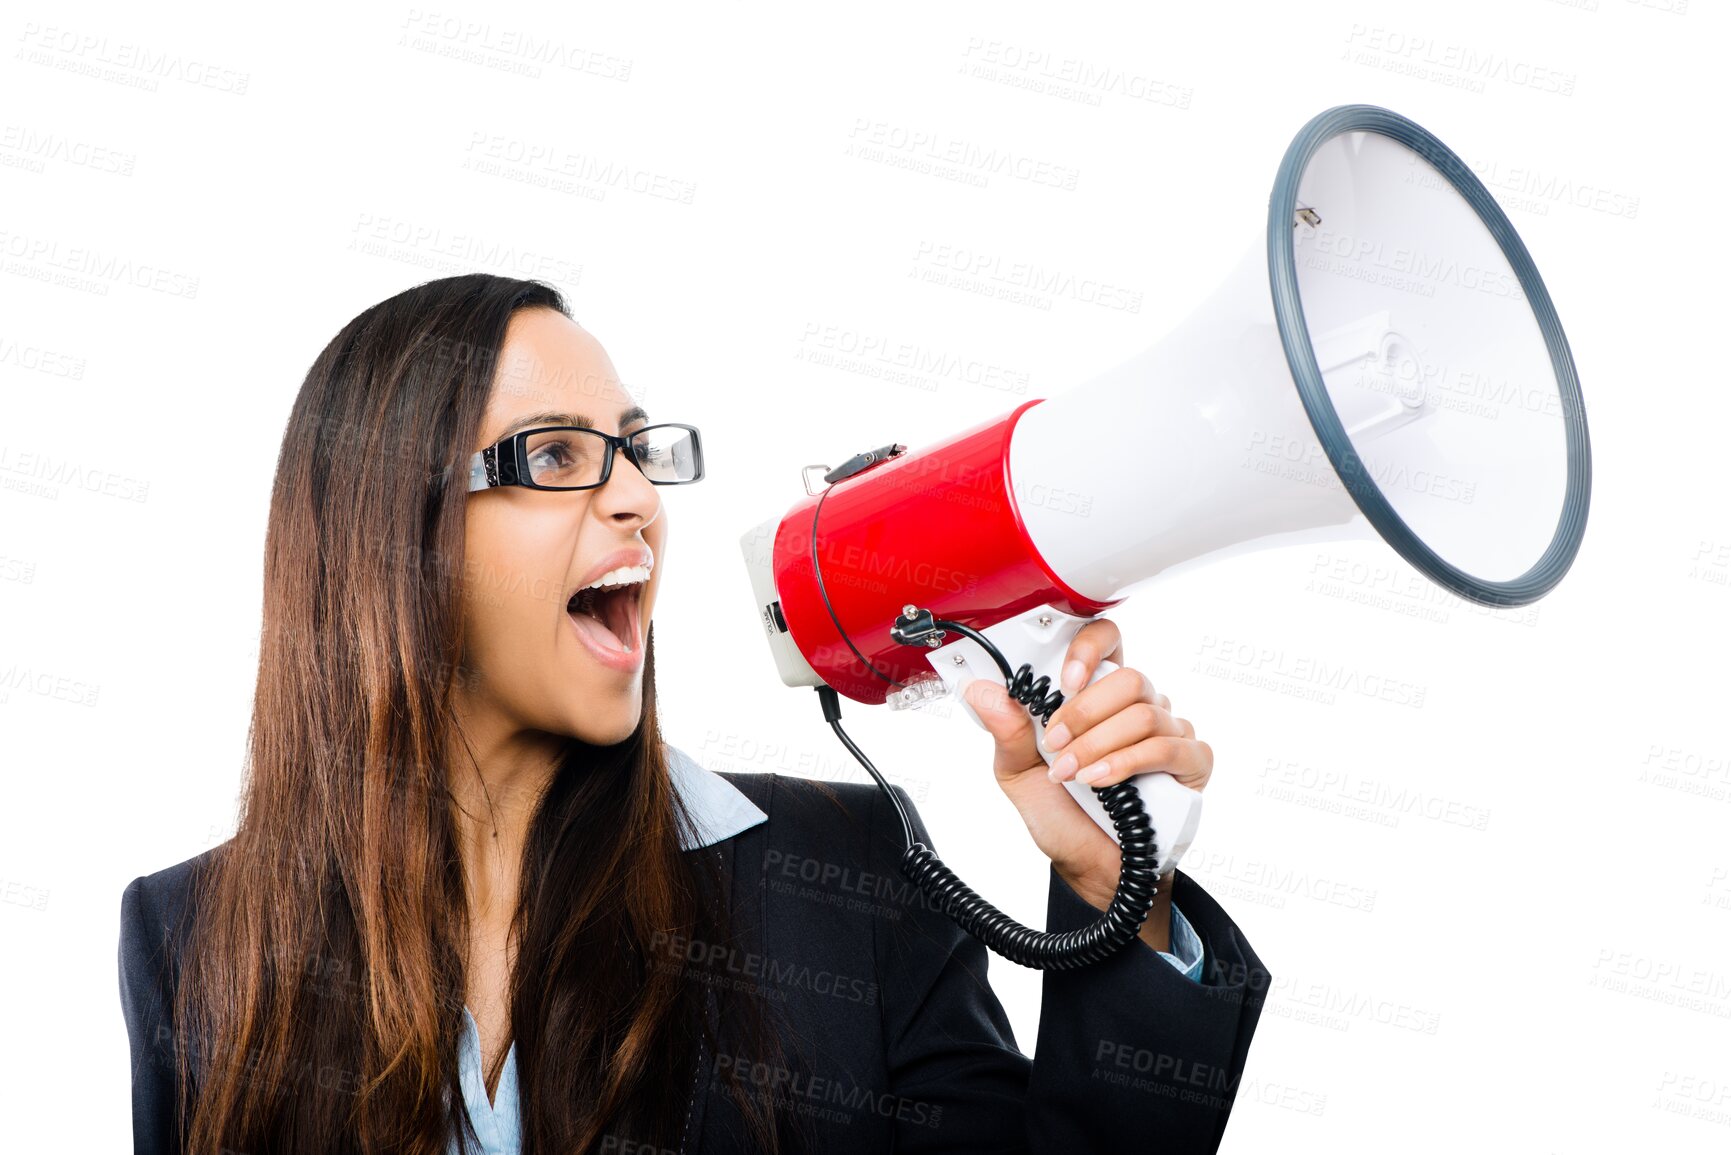 Buy stock photo Business woman, loudspeaker or megaphone to shout isolated on a transparent, png background. Professional female model person with speaker for corporate announcement, breaking news or communication